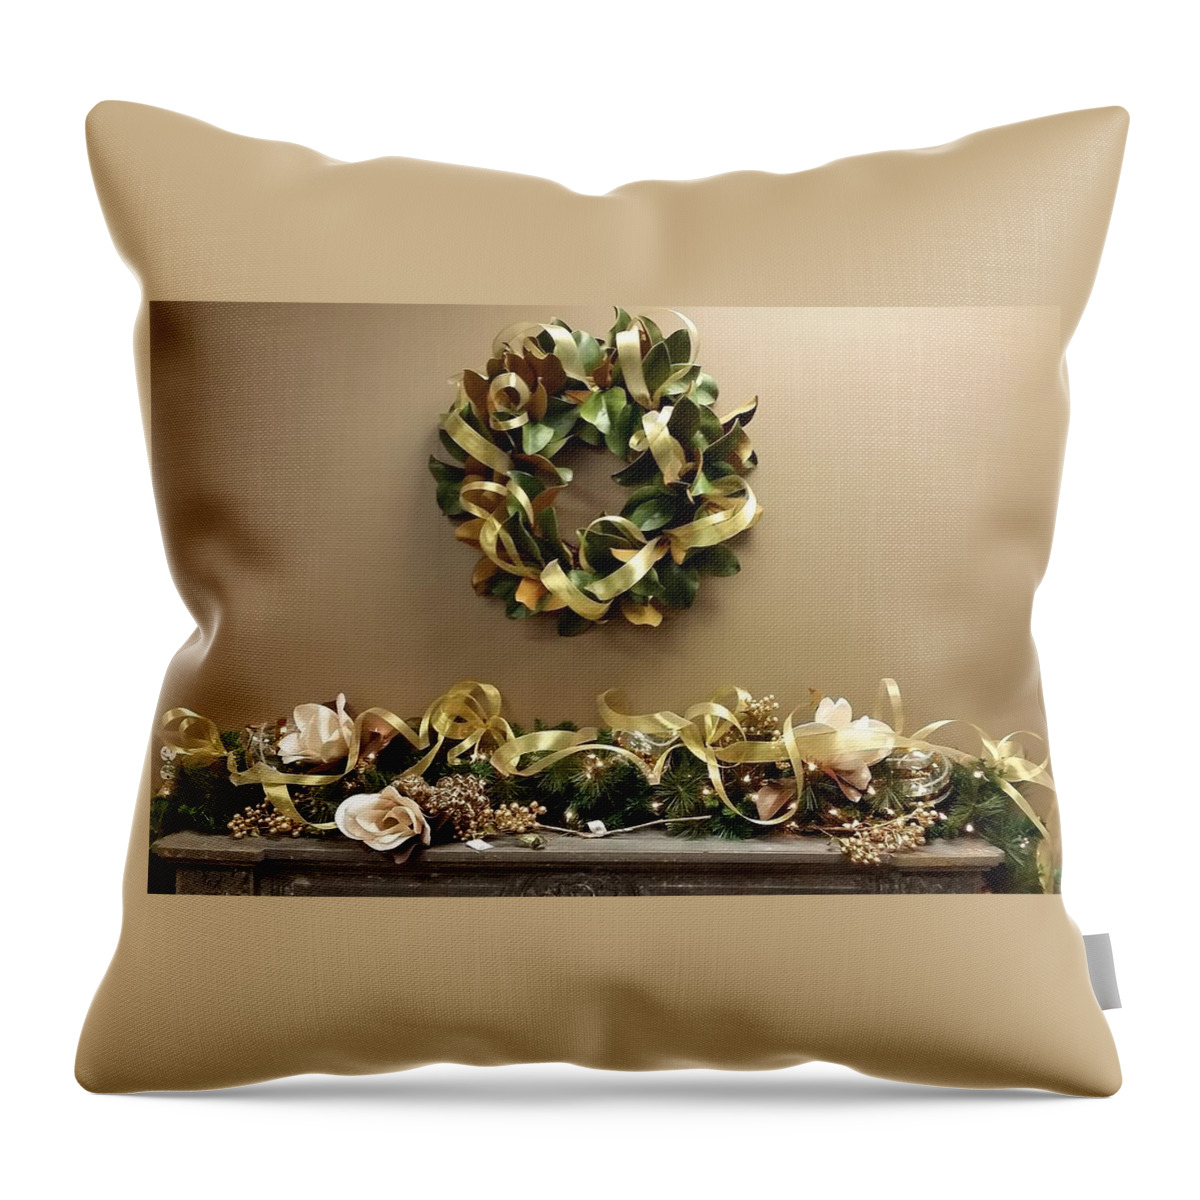 Wreath Throw Pillow featuring the photograph Christmas Wreath and Swag by Nancy Ayanna Wyatt